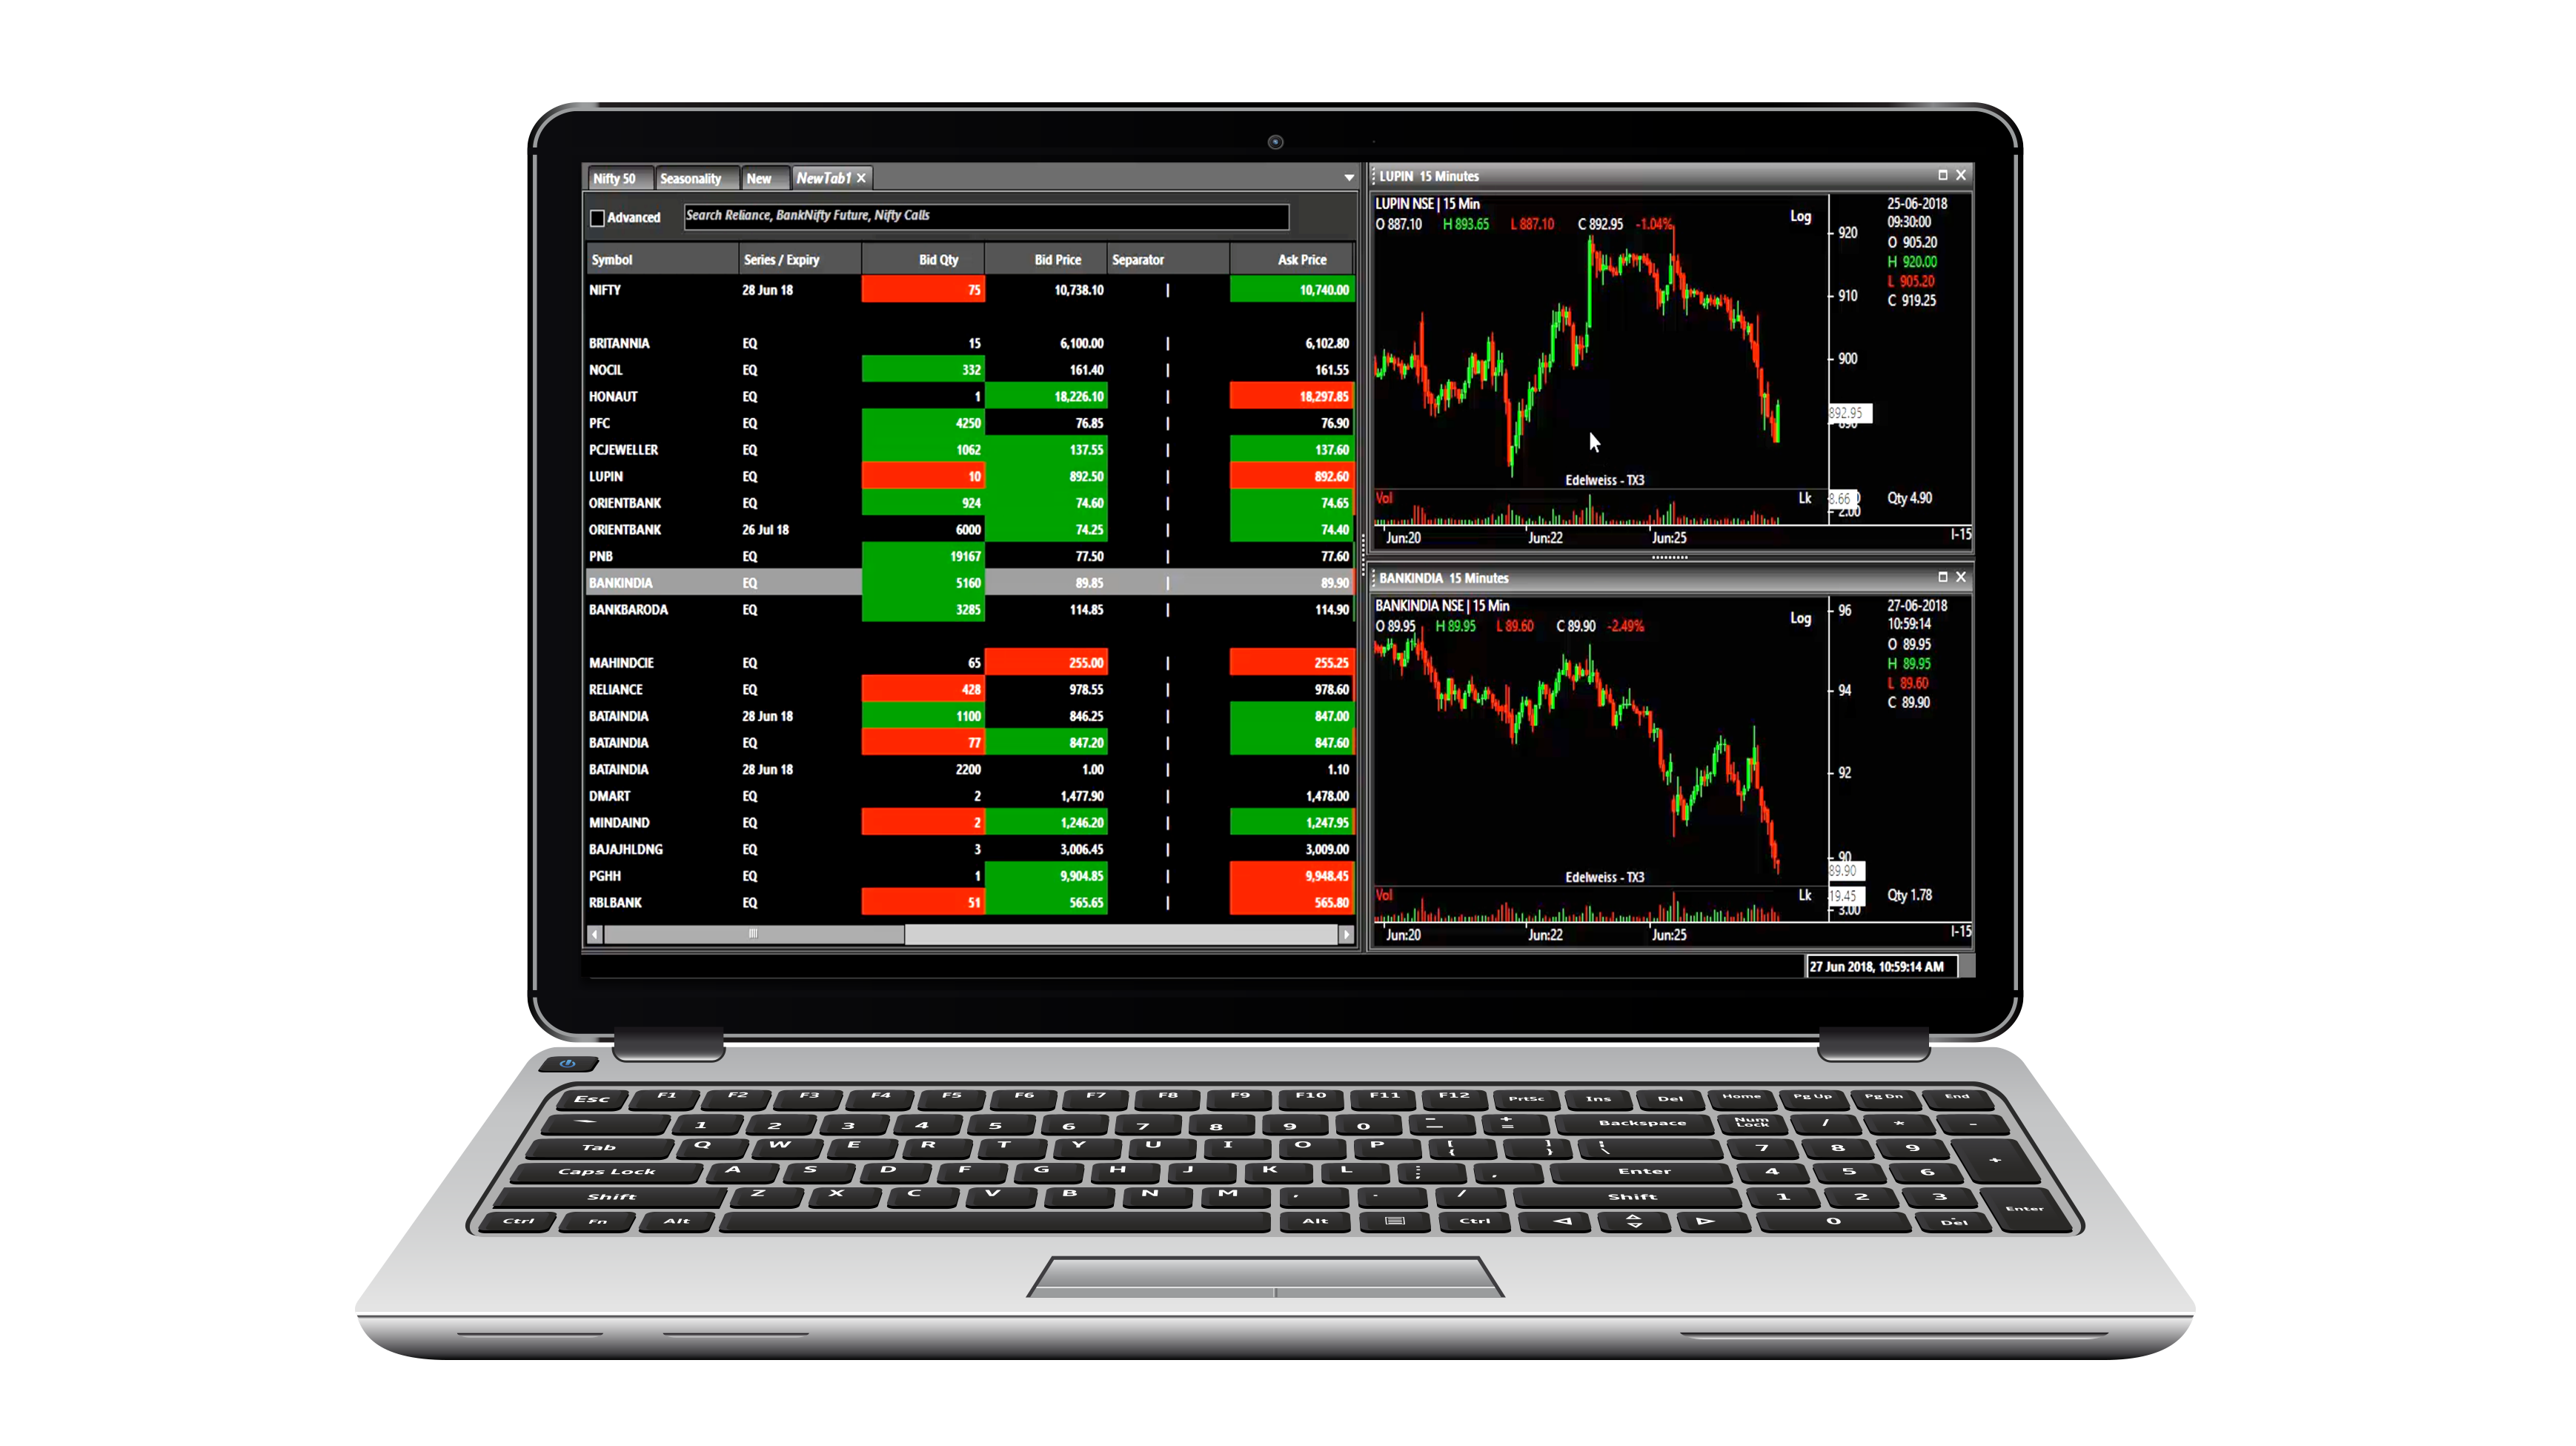 Real Time Data For Amibroker, Real Time Data For Metastock, Nse Live data feed, Mcx Live Data Feed, Real time Data for Nse, Real time Data for Mcx, Live data feed for amibroker, Live Data Feed for Metatsock